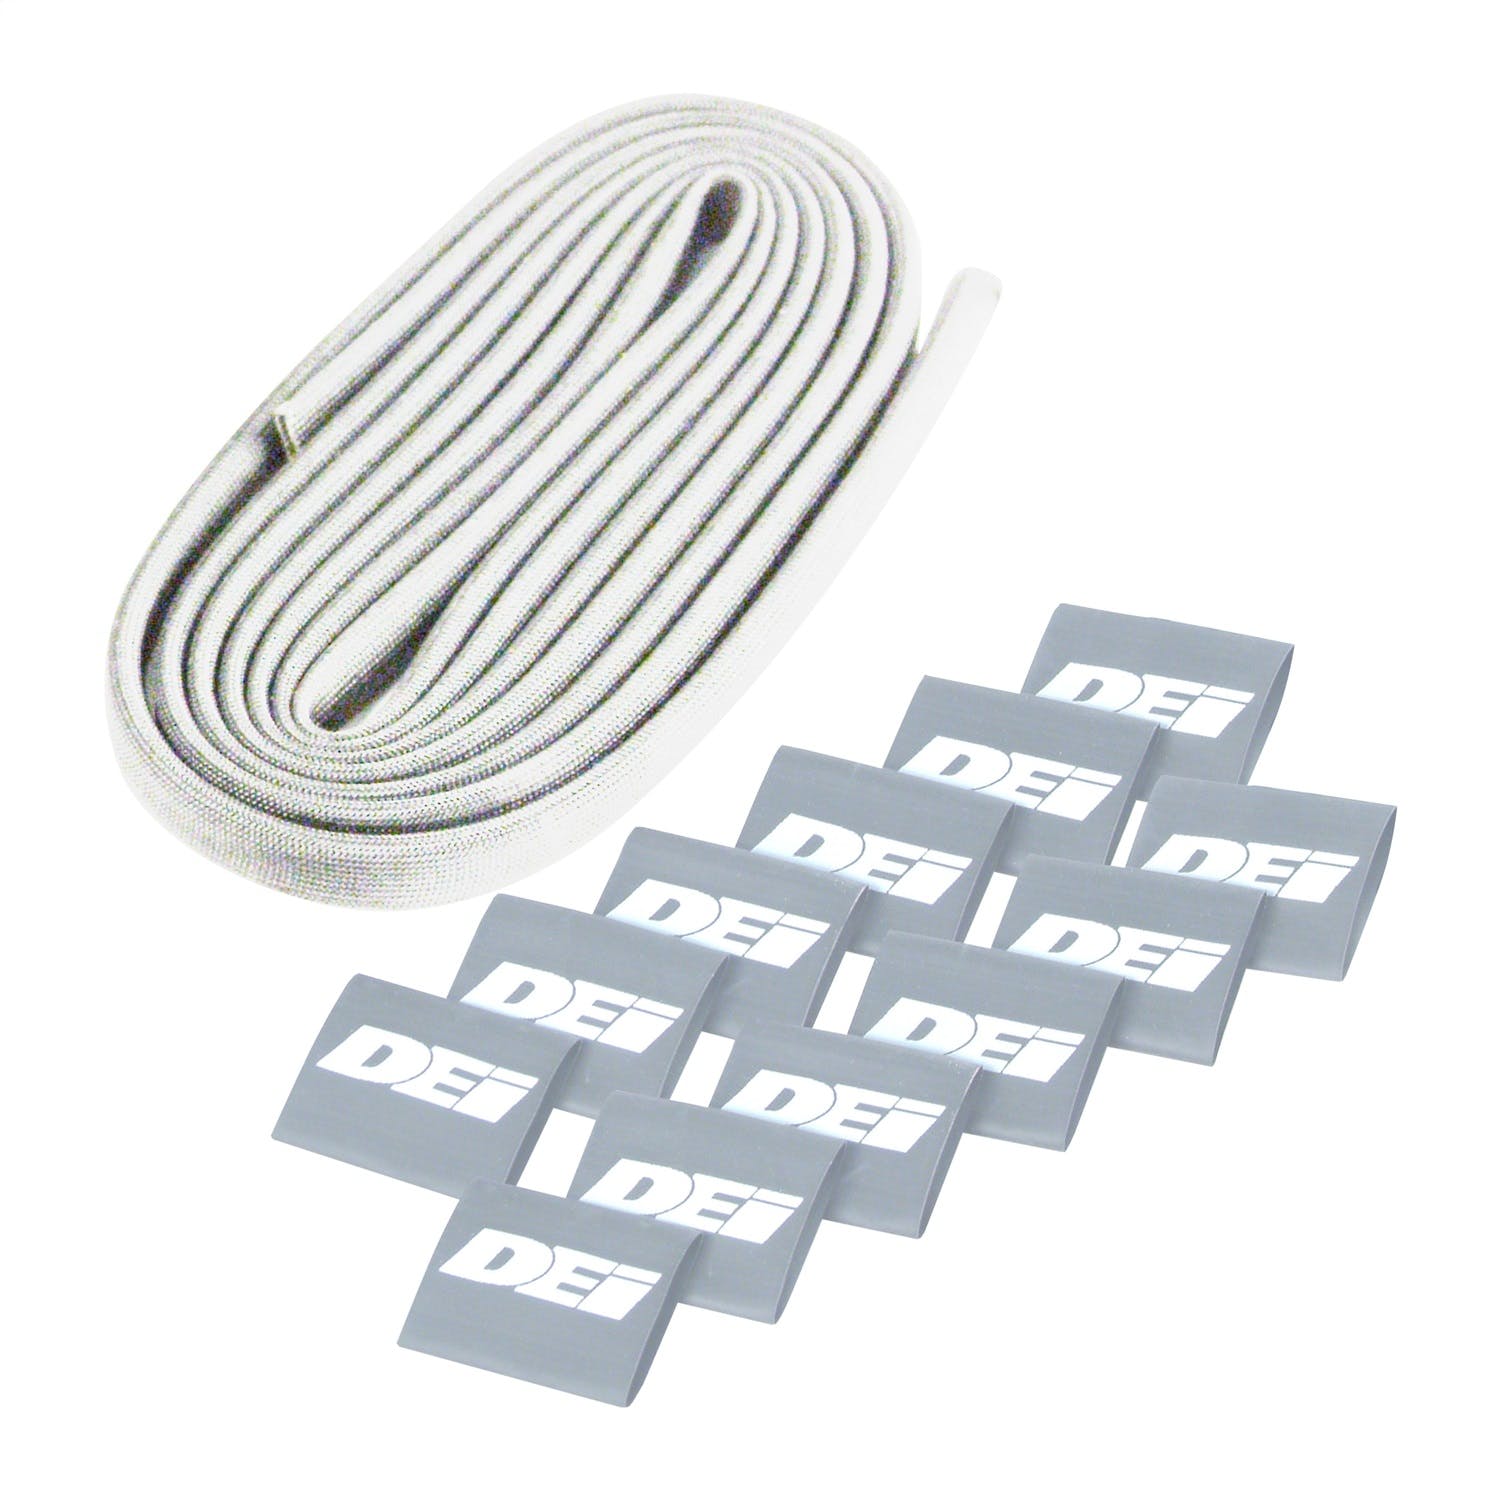 Design Engineering, Inc. 10577 Protect-A-Wire 4 Cylinder - 6 - 4-pack - Silver